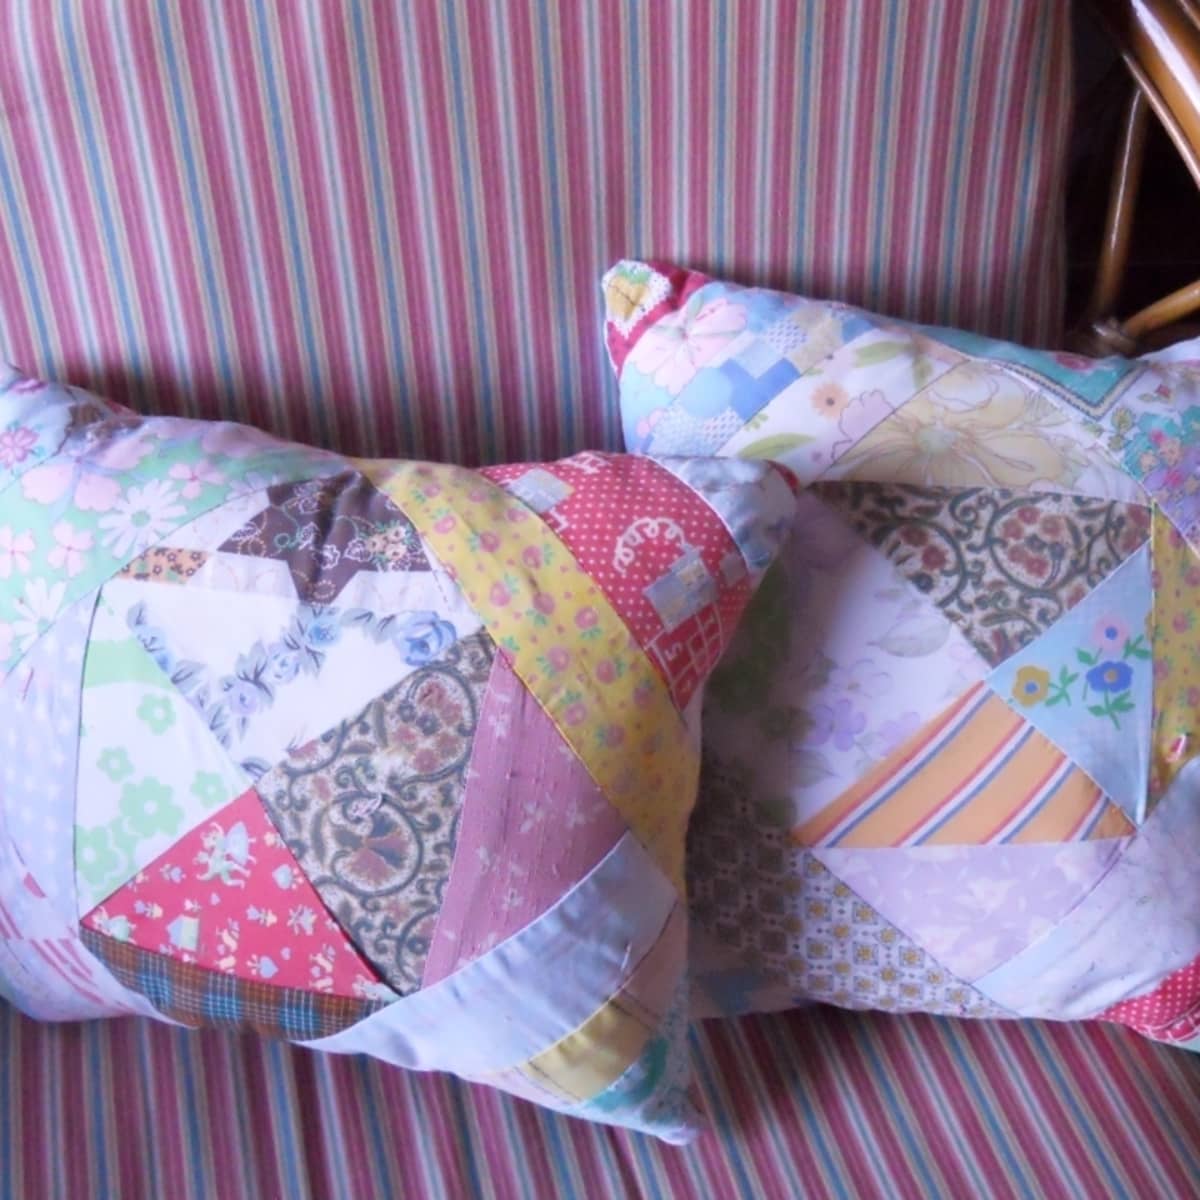 How to Sew an 18 inch Pillow Cover Tutorial - The Idea Room